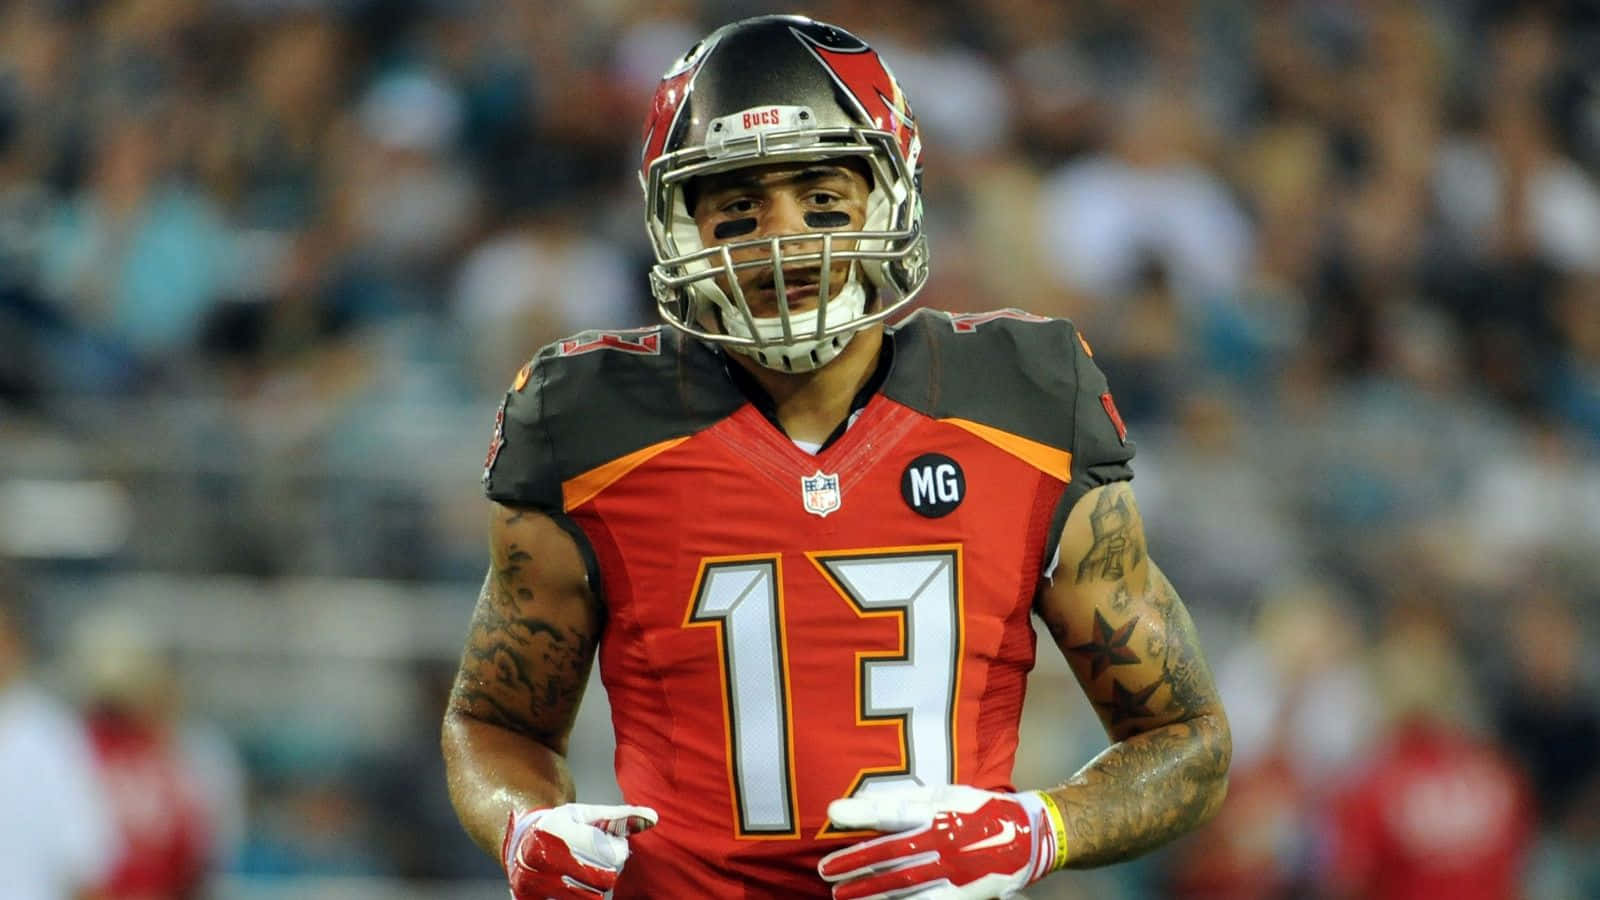 NFL wide-receiver Mike Evans #13 for the Tampa Bay Buccaneers Wallpaper